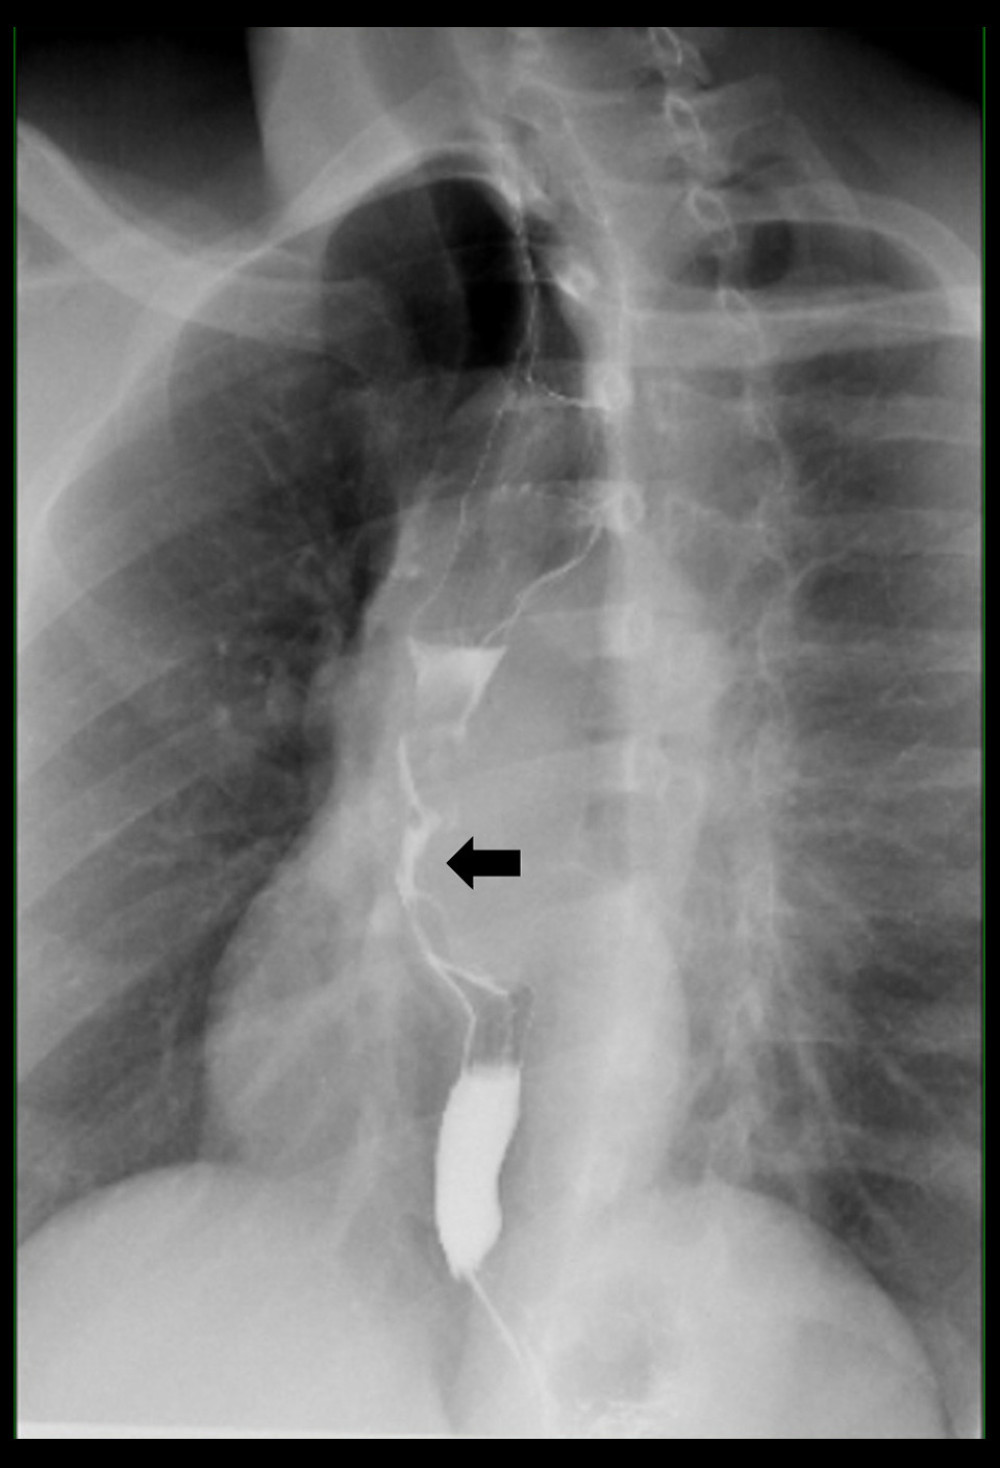 A preoperative barium swallow study showing a giant esophageal leiomyoma that is associated with midesophageal narrowing (black arrow) and deviation of the esophagus to the right.